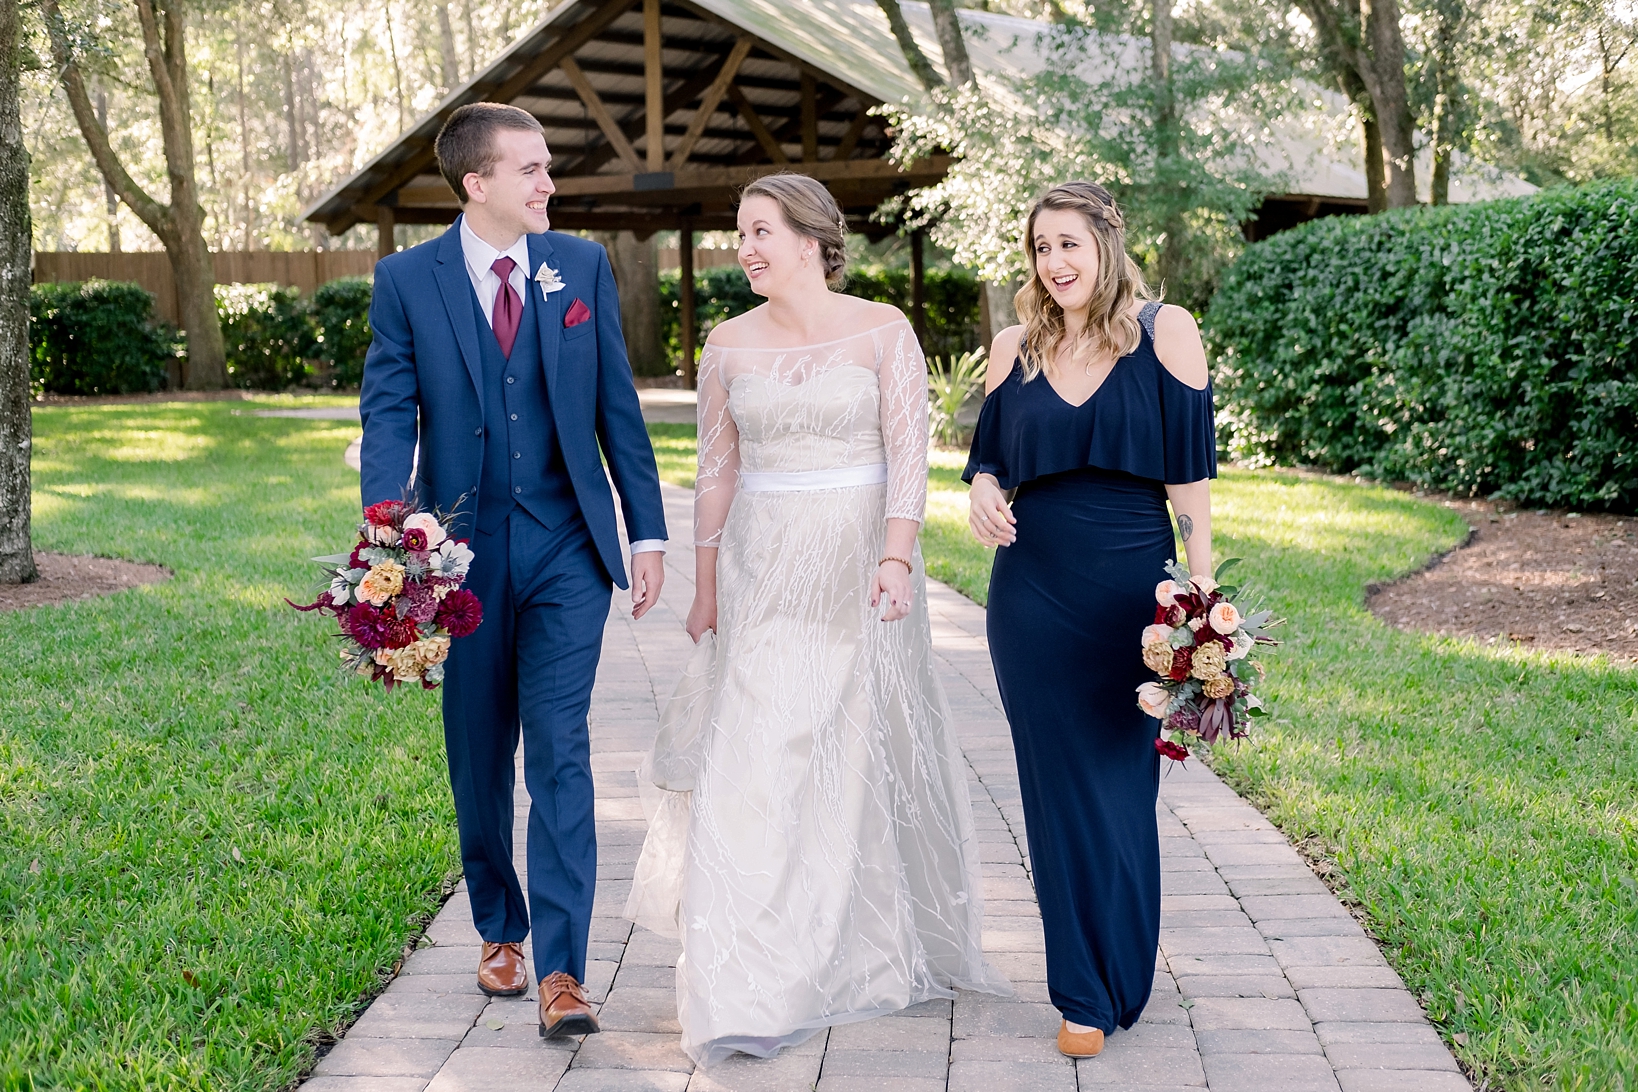 Bride and her wedding party walk a brick path at Bowing Oaks Plantation in Jacksonville, FL